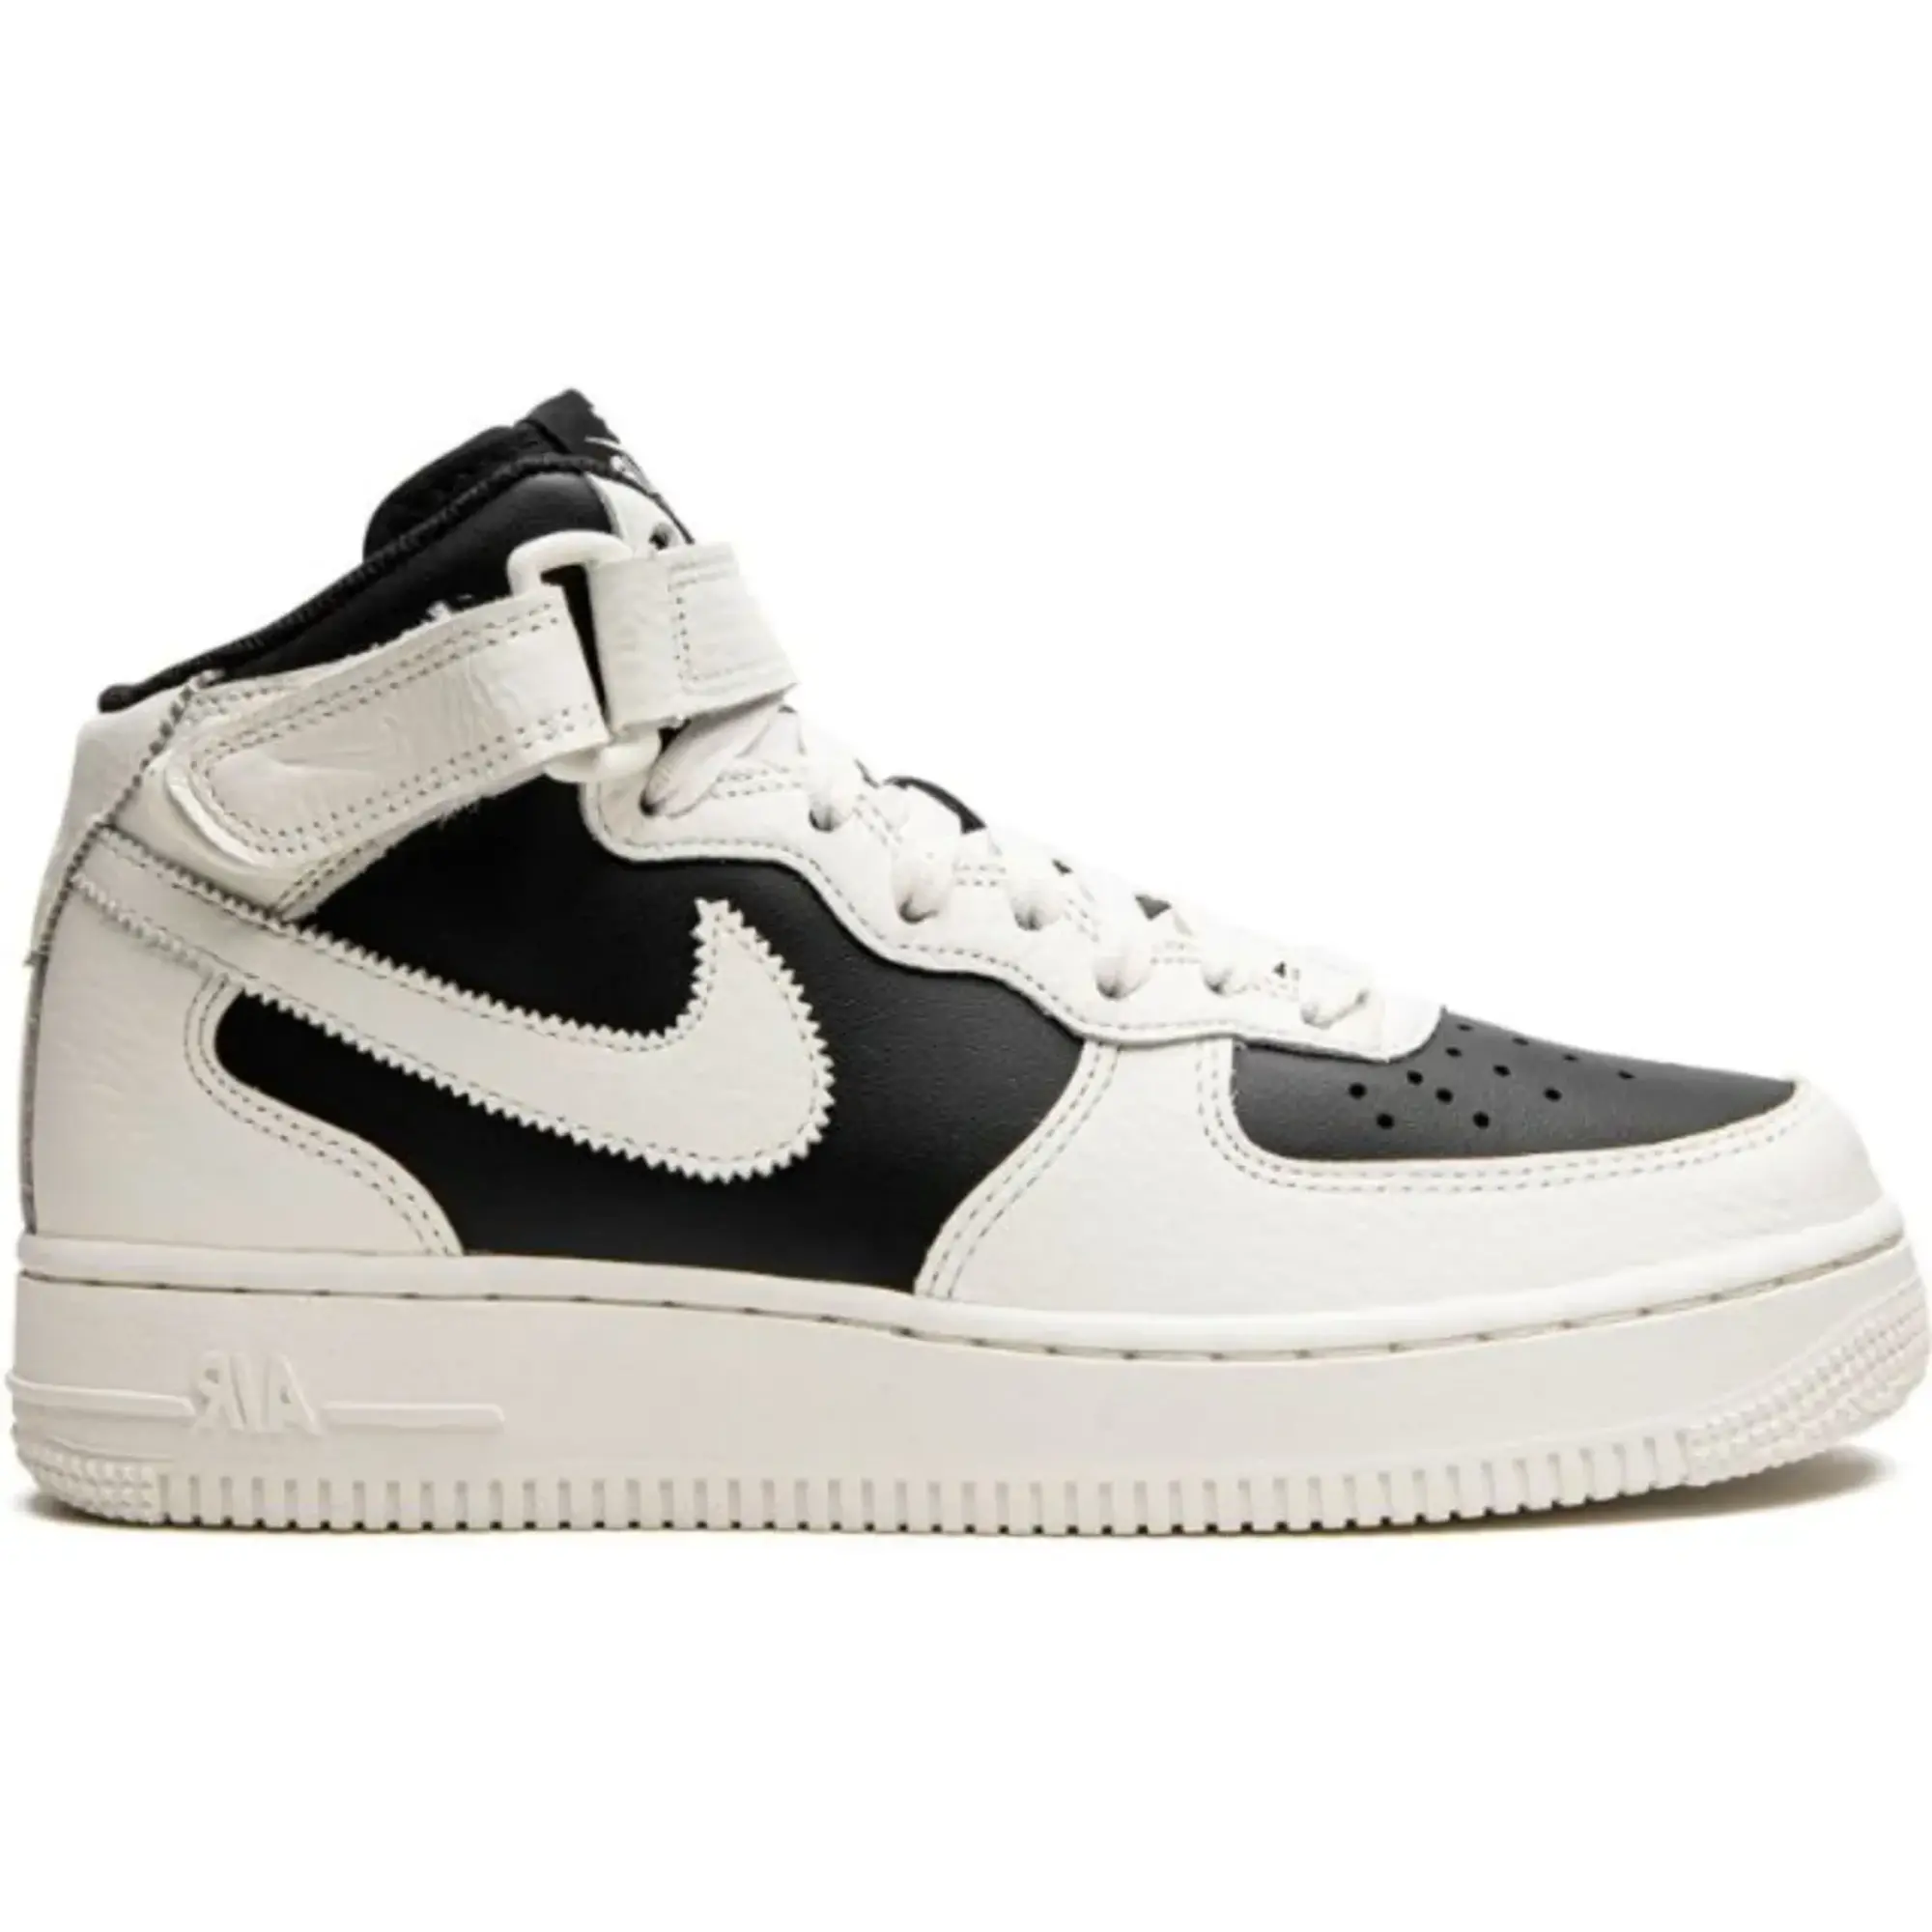 Nike Womens AIR FORCE 1 '07 MID Black Sial Shoes